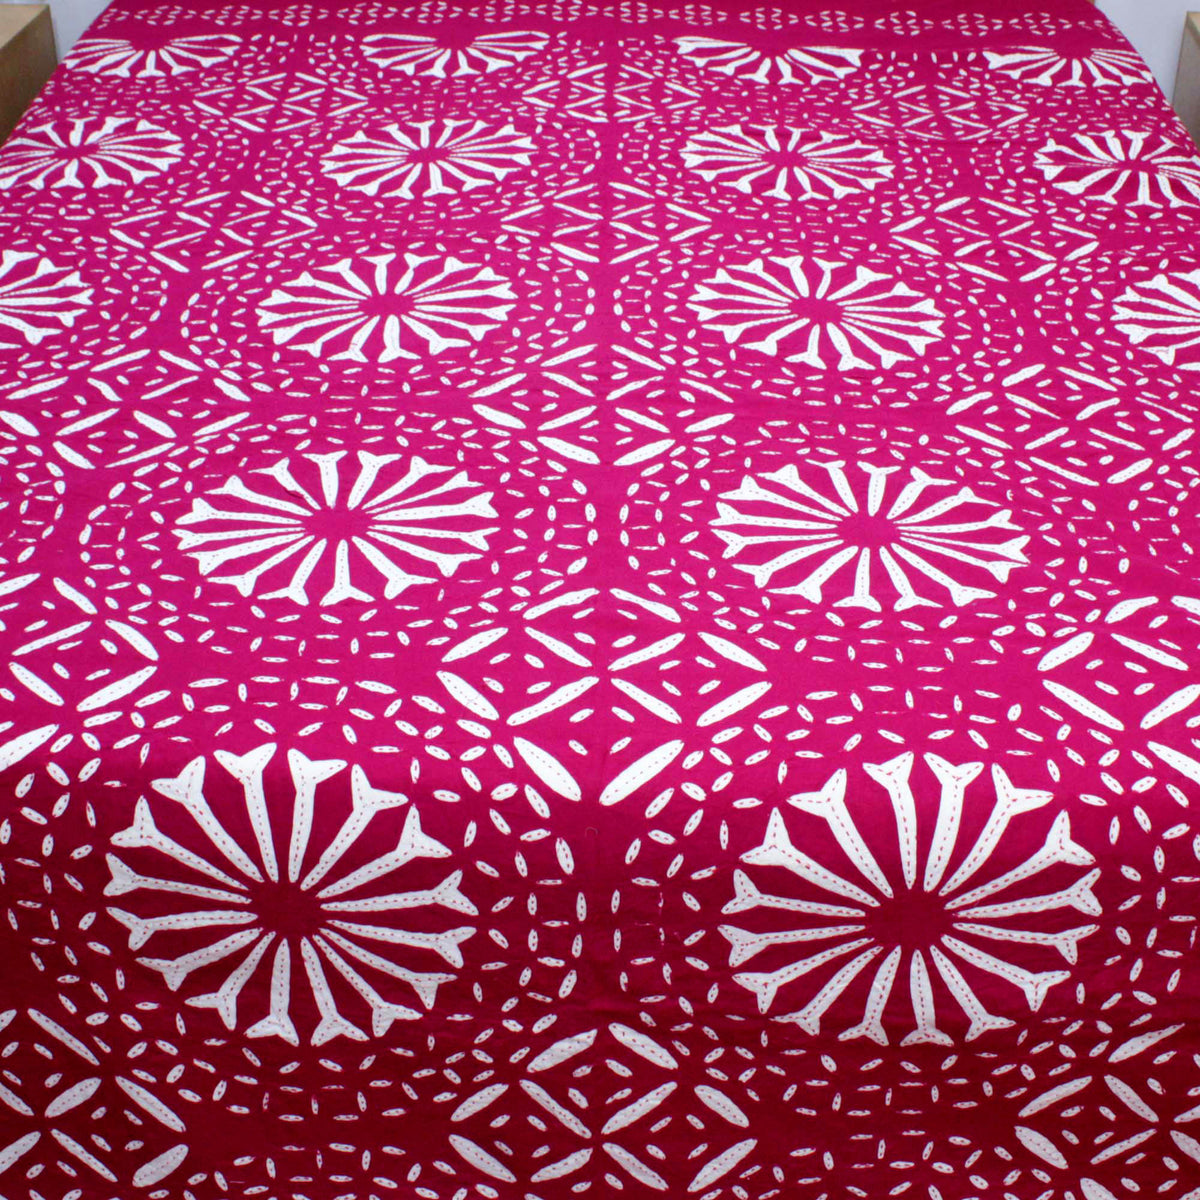 Pink Indian Applique Cutwork Kantha Bedspread,Queen Size Bed Cover, Bohemian Reversible bedspread, Handmade Bohemian Embroidered Applique